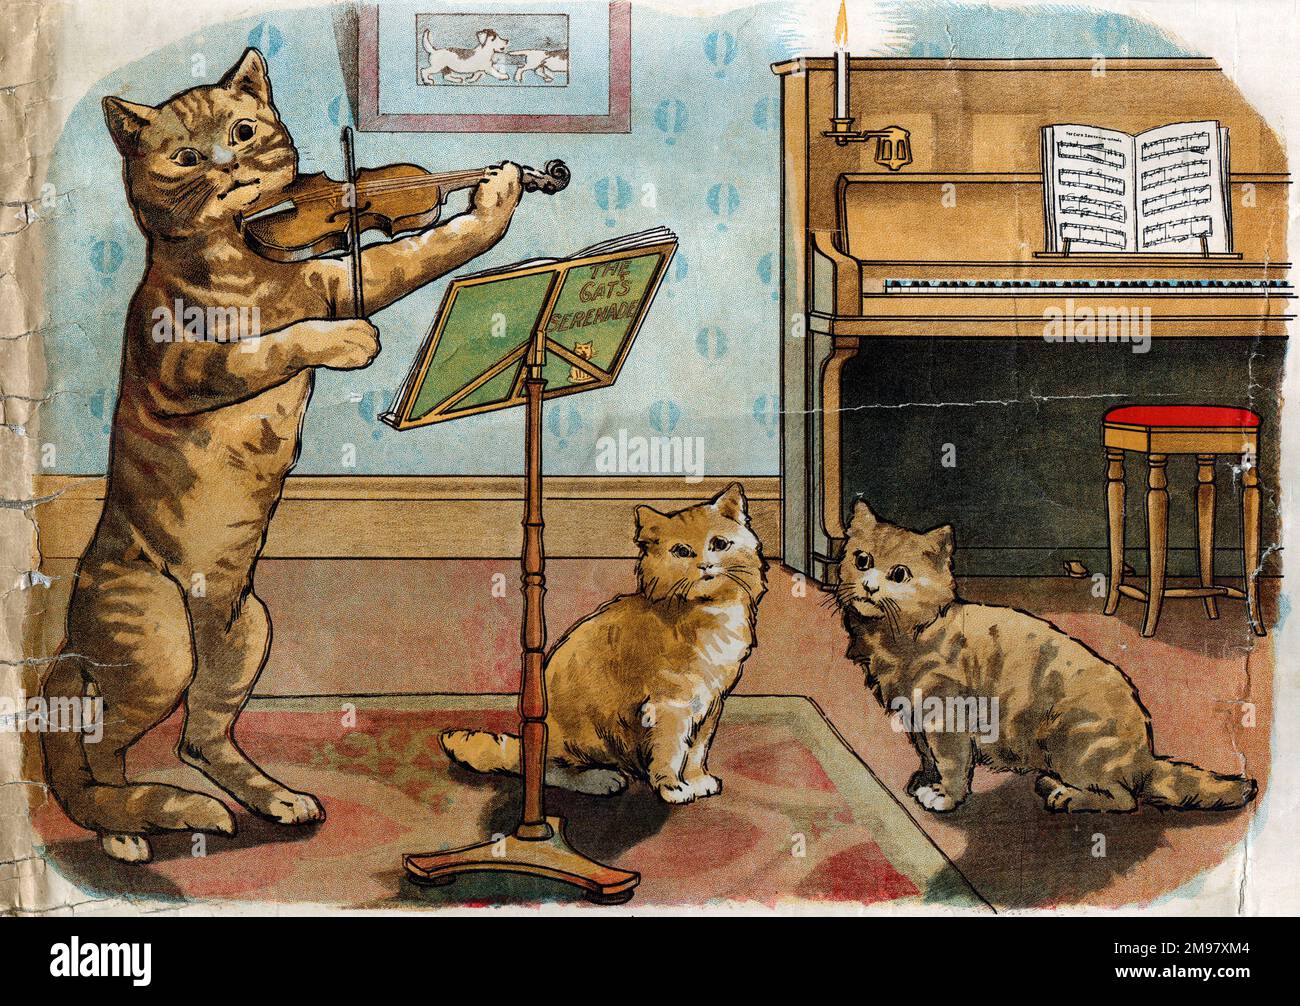 Illustration, Hey Diddle Diddle, the cat and the fiddle.   (1 of 4) Stock Photo